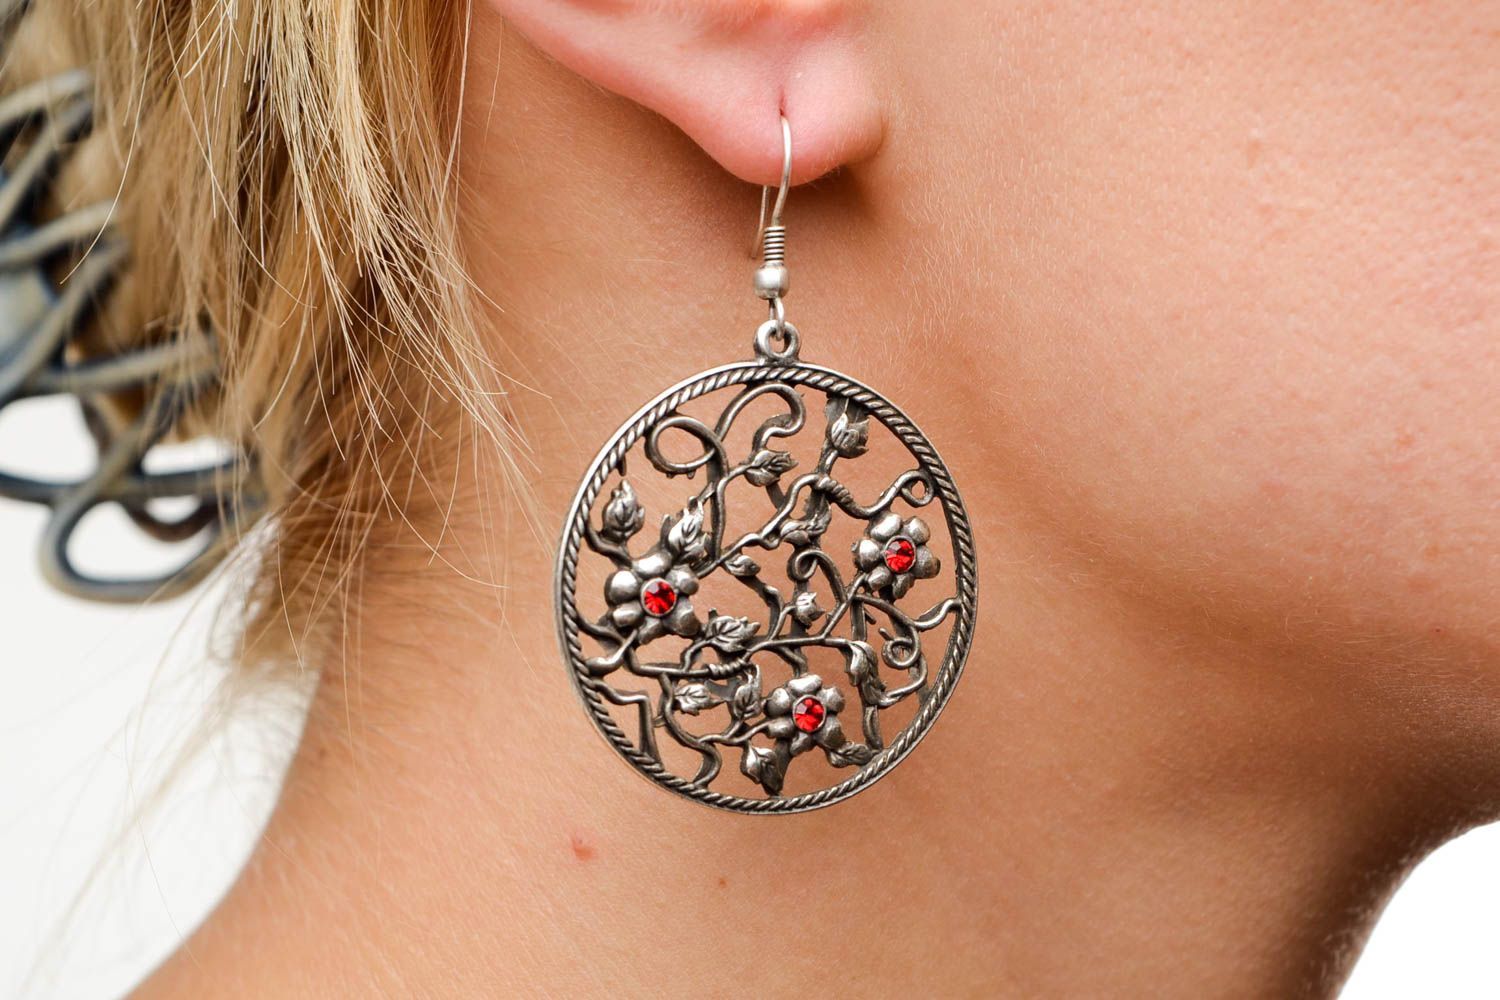 Round earrings with charms metal hand crafted women accessories idea for gift photo 2